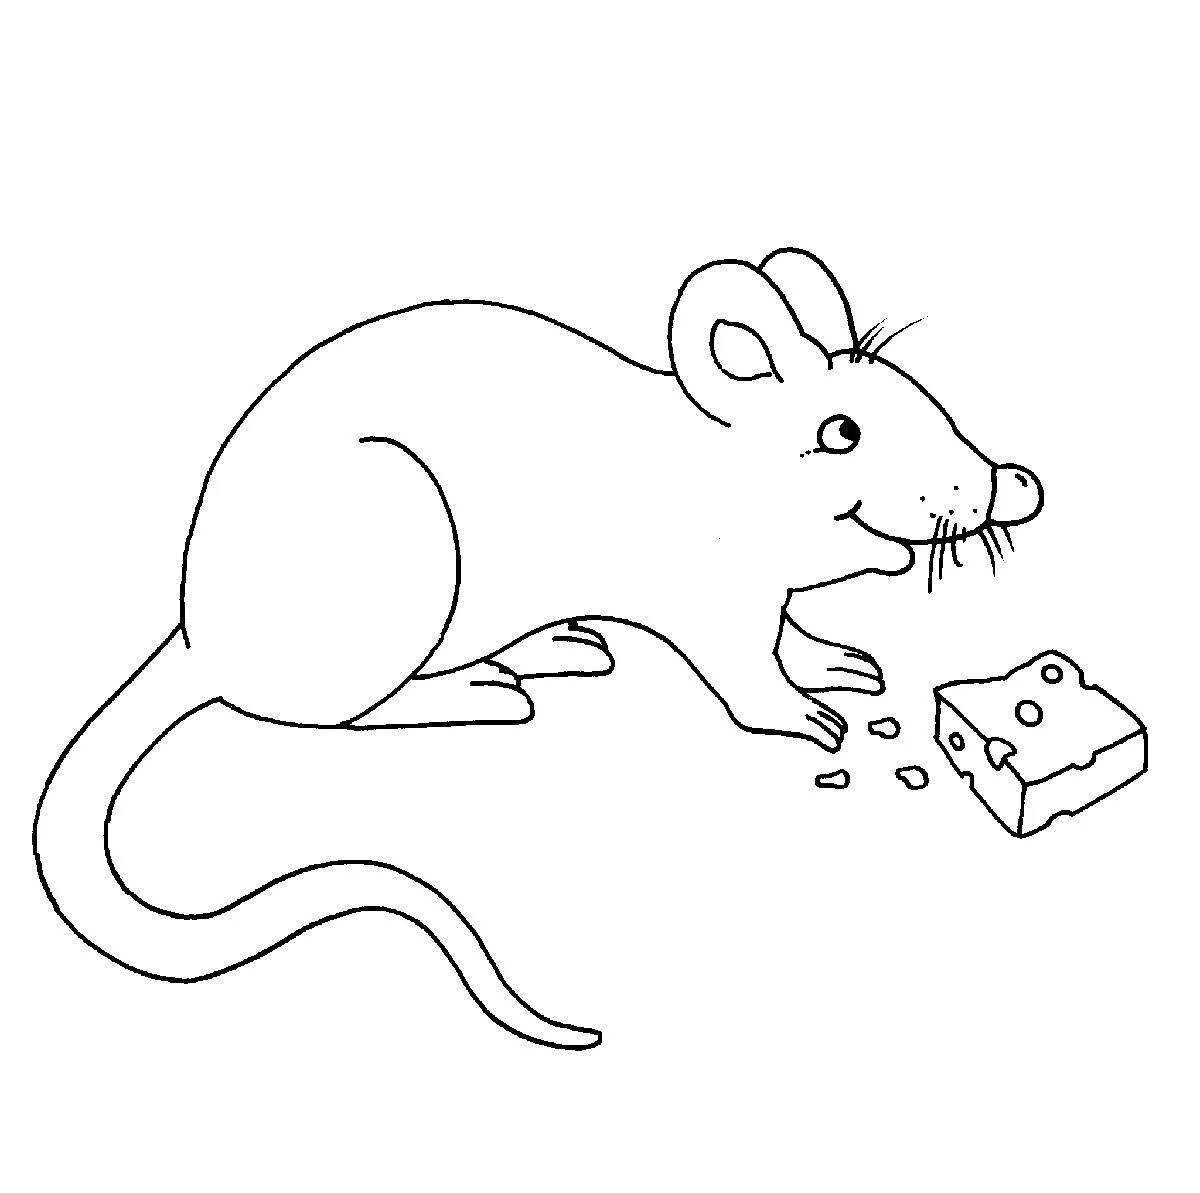 Harvest mouse playful coloring page